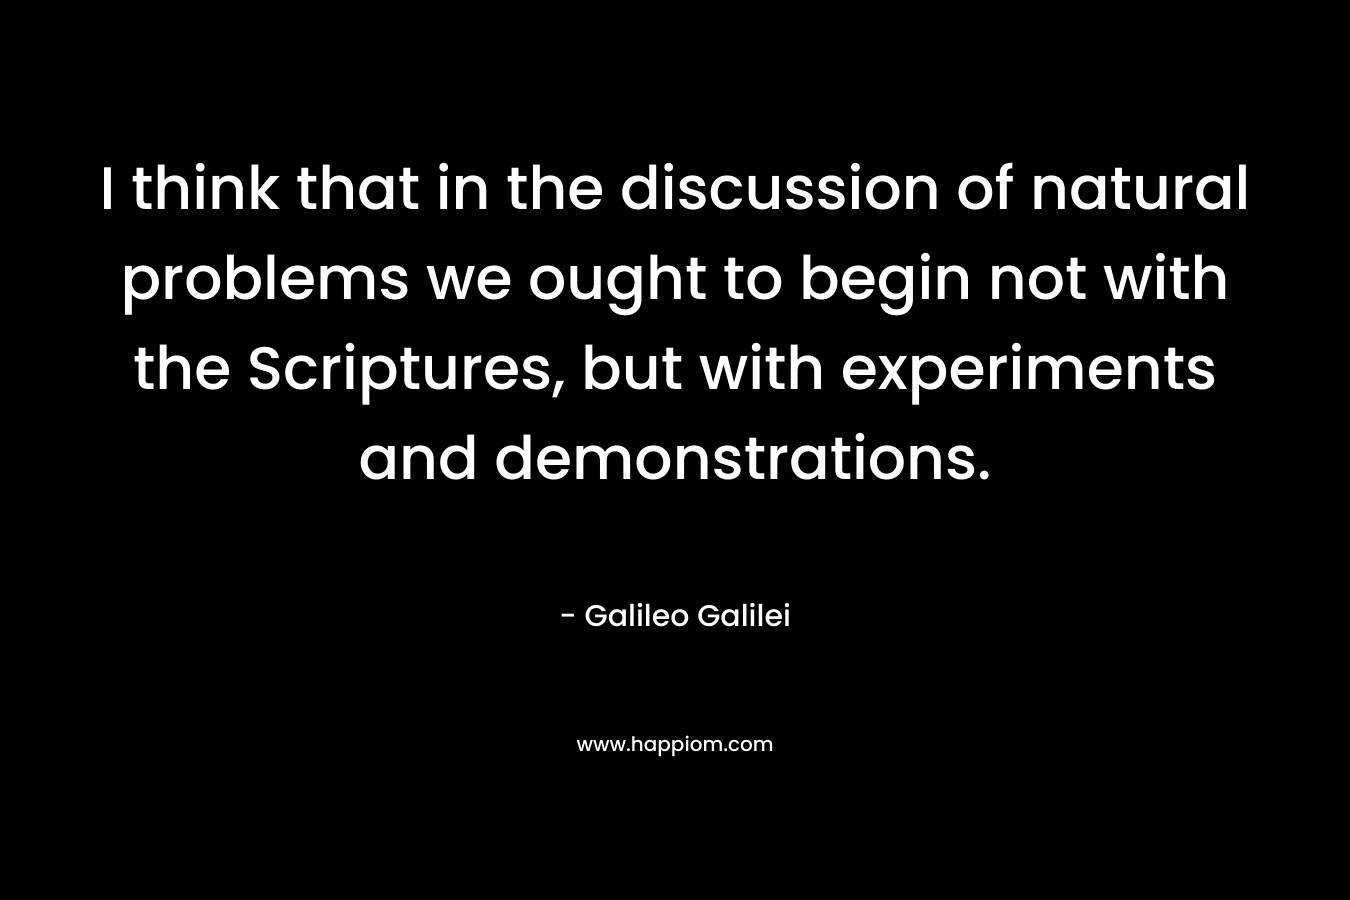 I think that in the discussion of natural problems we ought to begin not with the Scriptures, but with experiments and demonstrations.